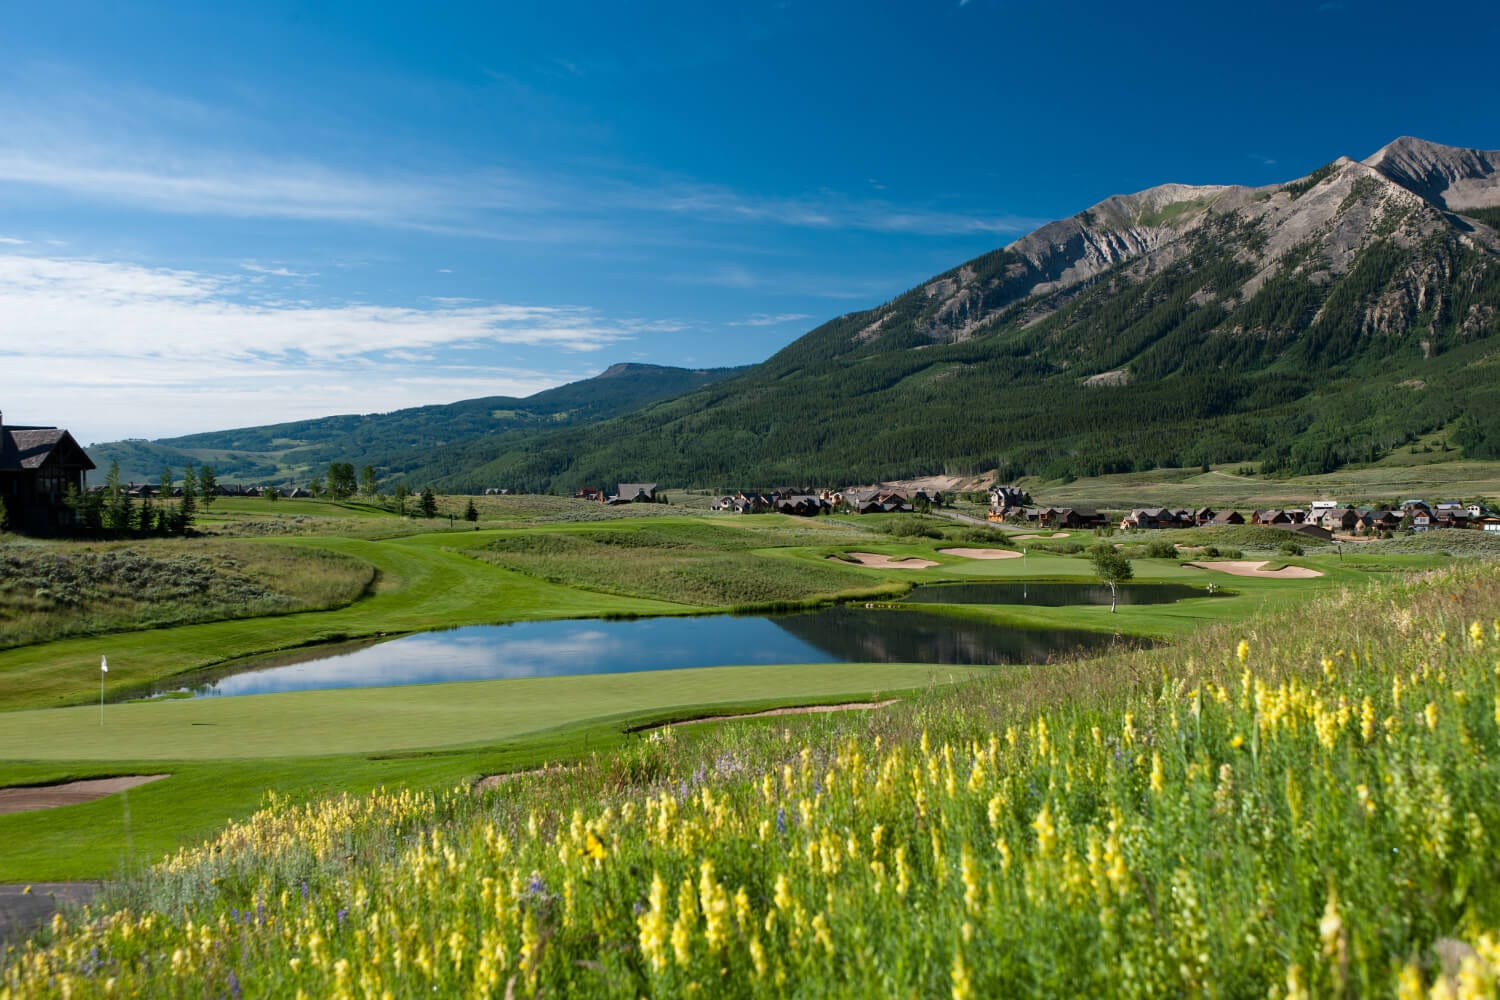 The Club at Crested Butte